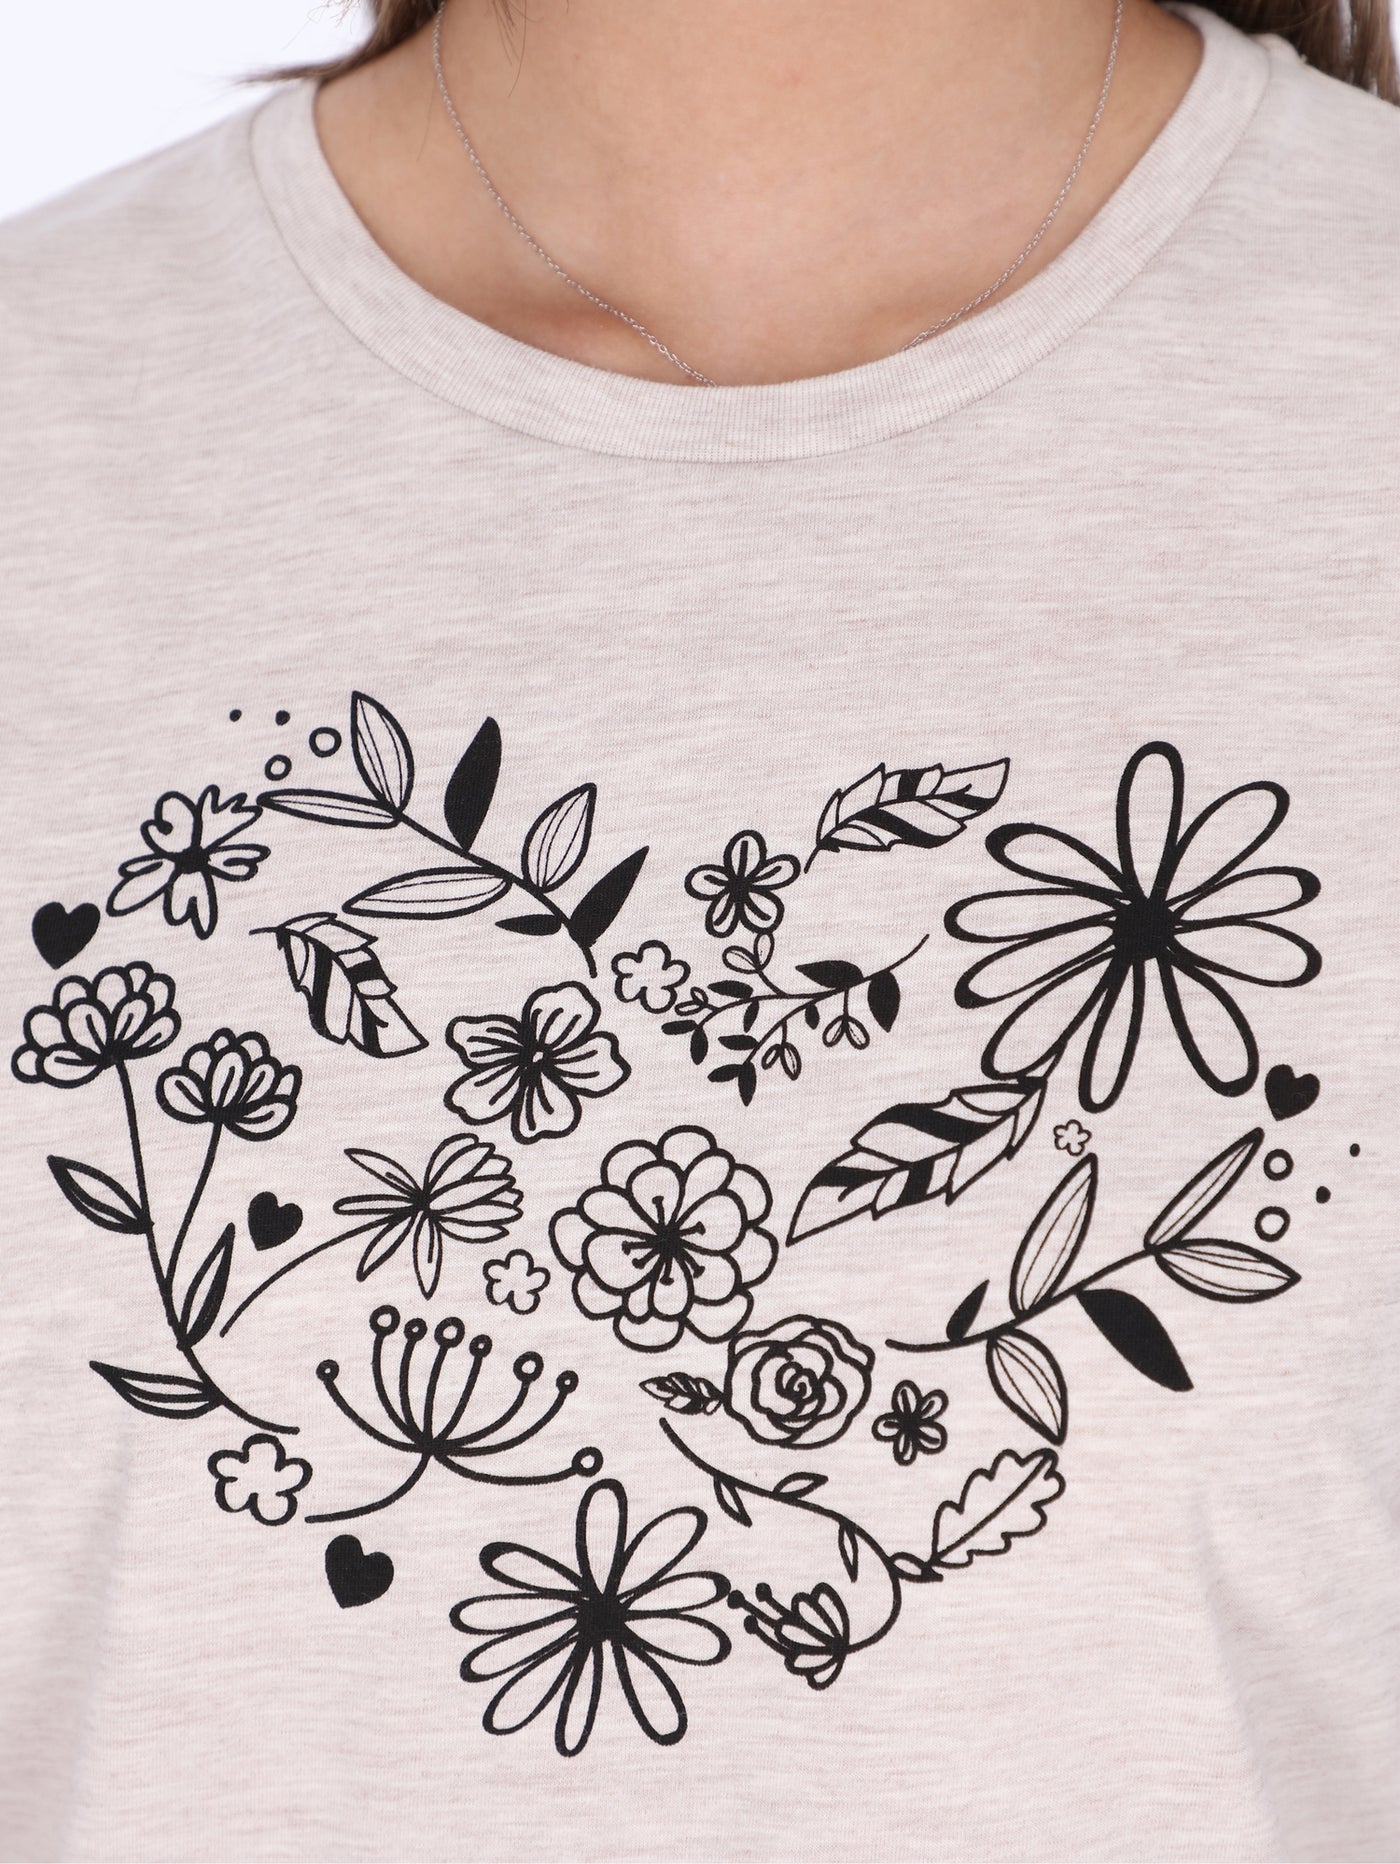 OR Women's Floral Print T-Shirt